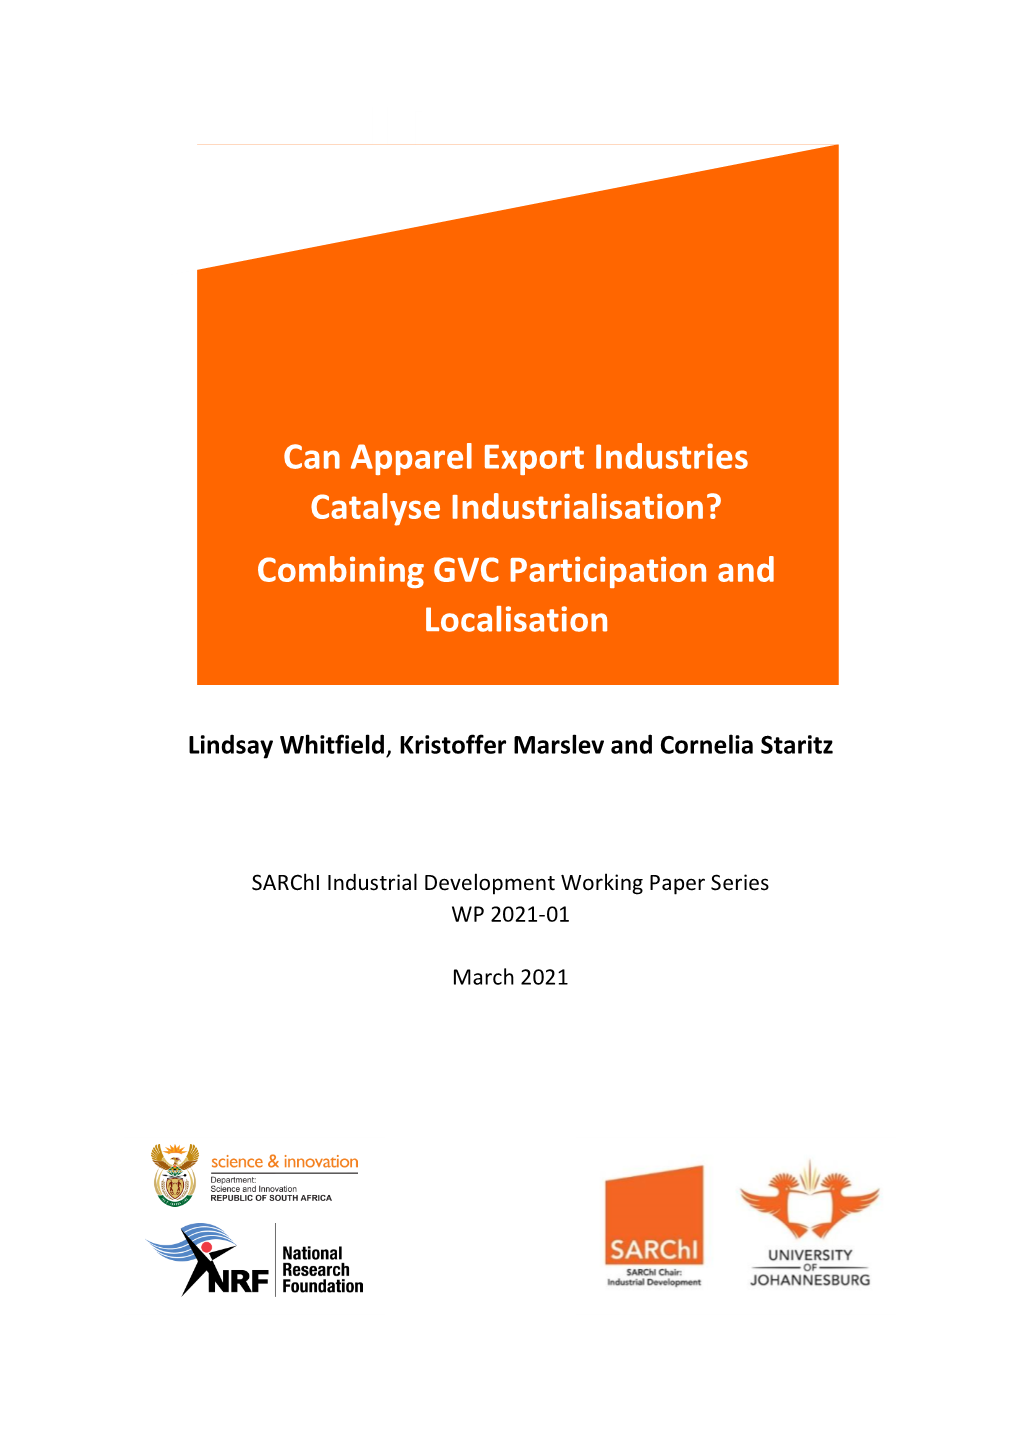 Can Apparel Export Industries Catalyse Industrialisation? Combining GVC Participation and Localisation